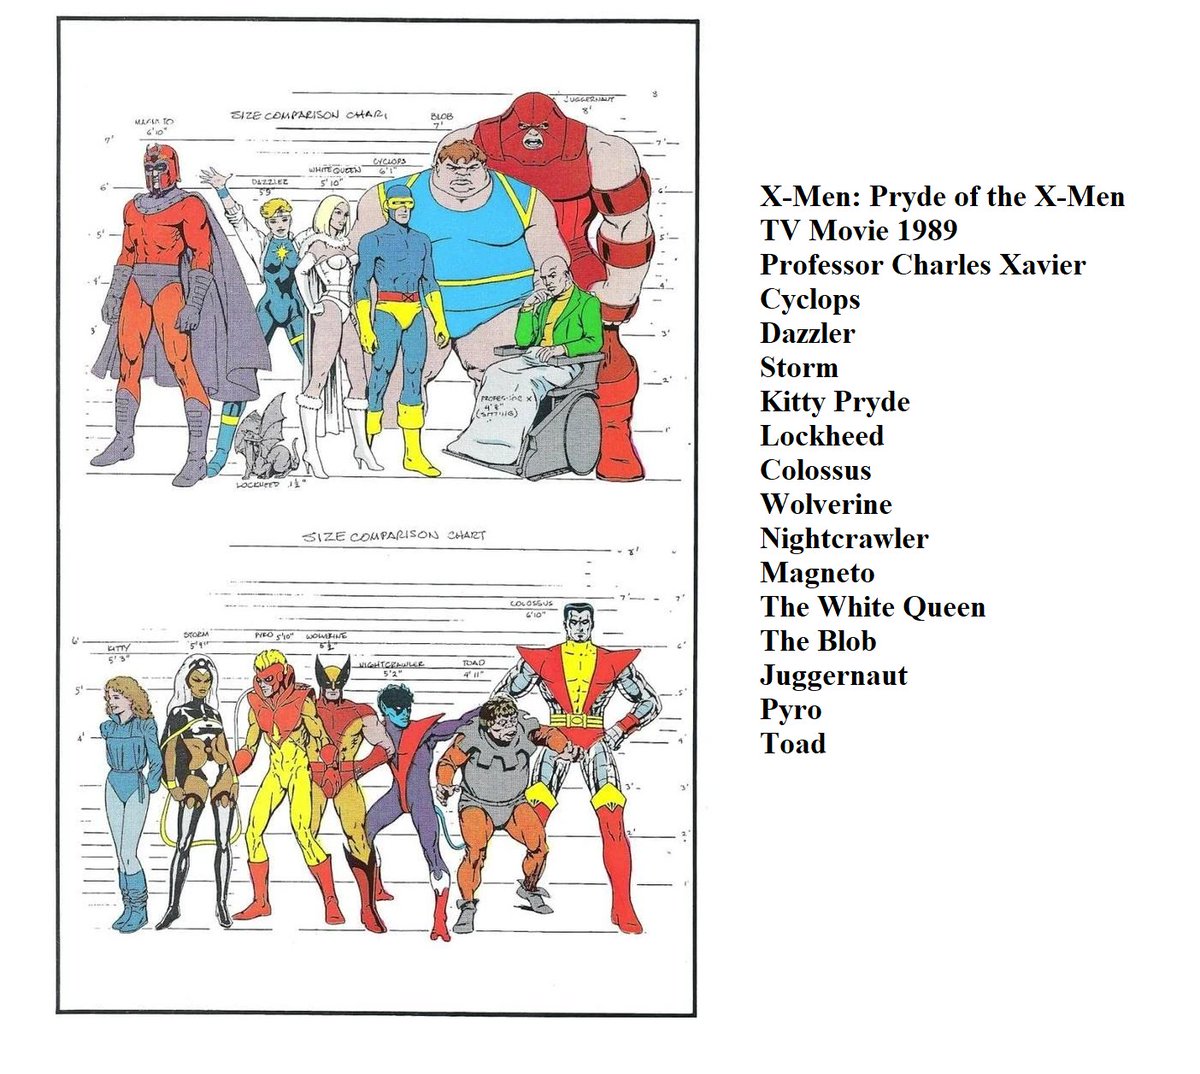 Wow look at how X-Men started in cartoons before 1992 @xmentas to now #XMen97. 1966-1989 in this post. @ZannLenore @xmendirector @alysontheother @AJLoCascio @holycowhollych @burdge_tara @jpkarliak @realcaldodd